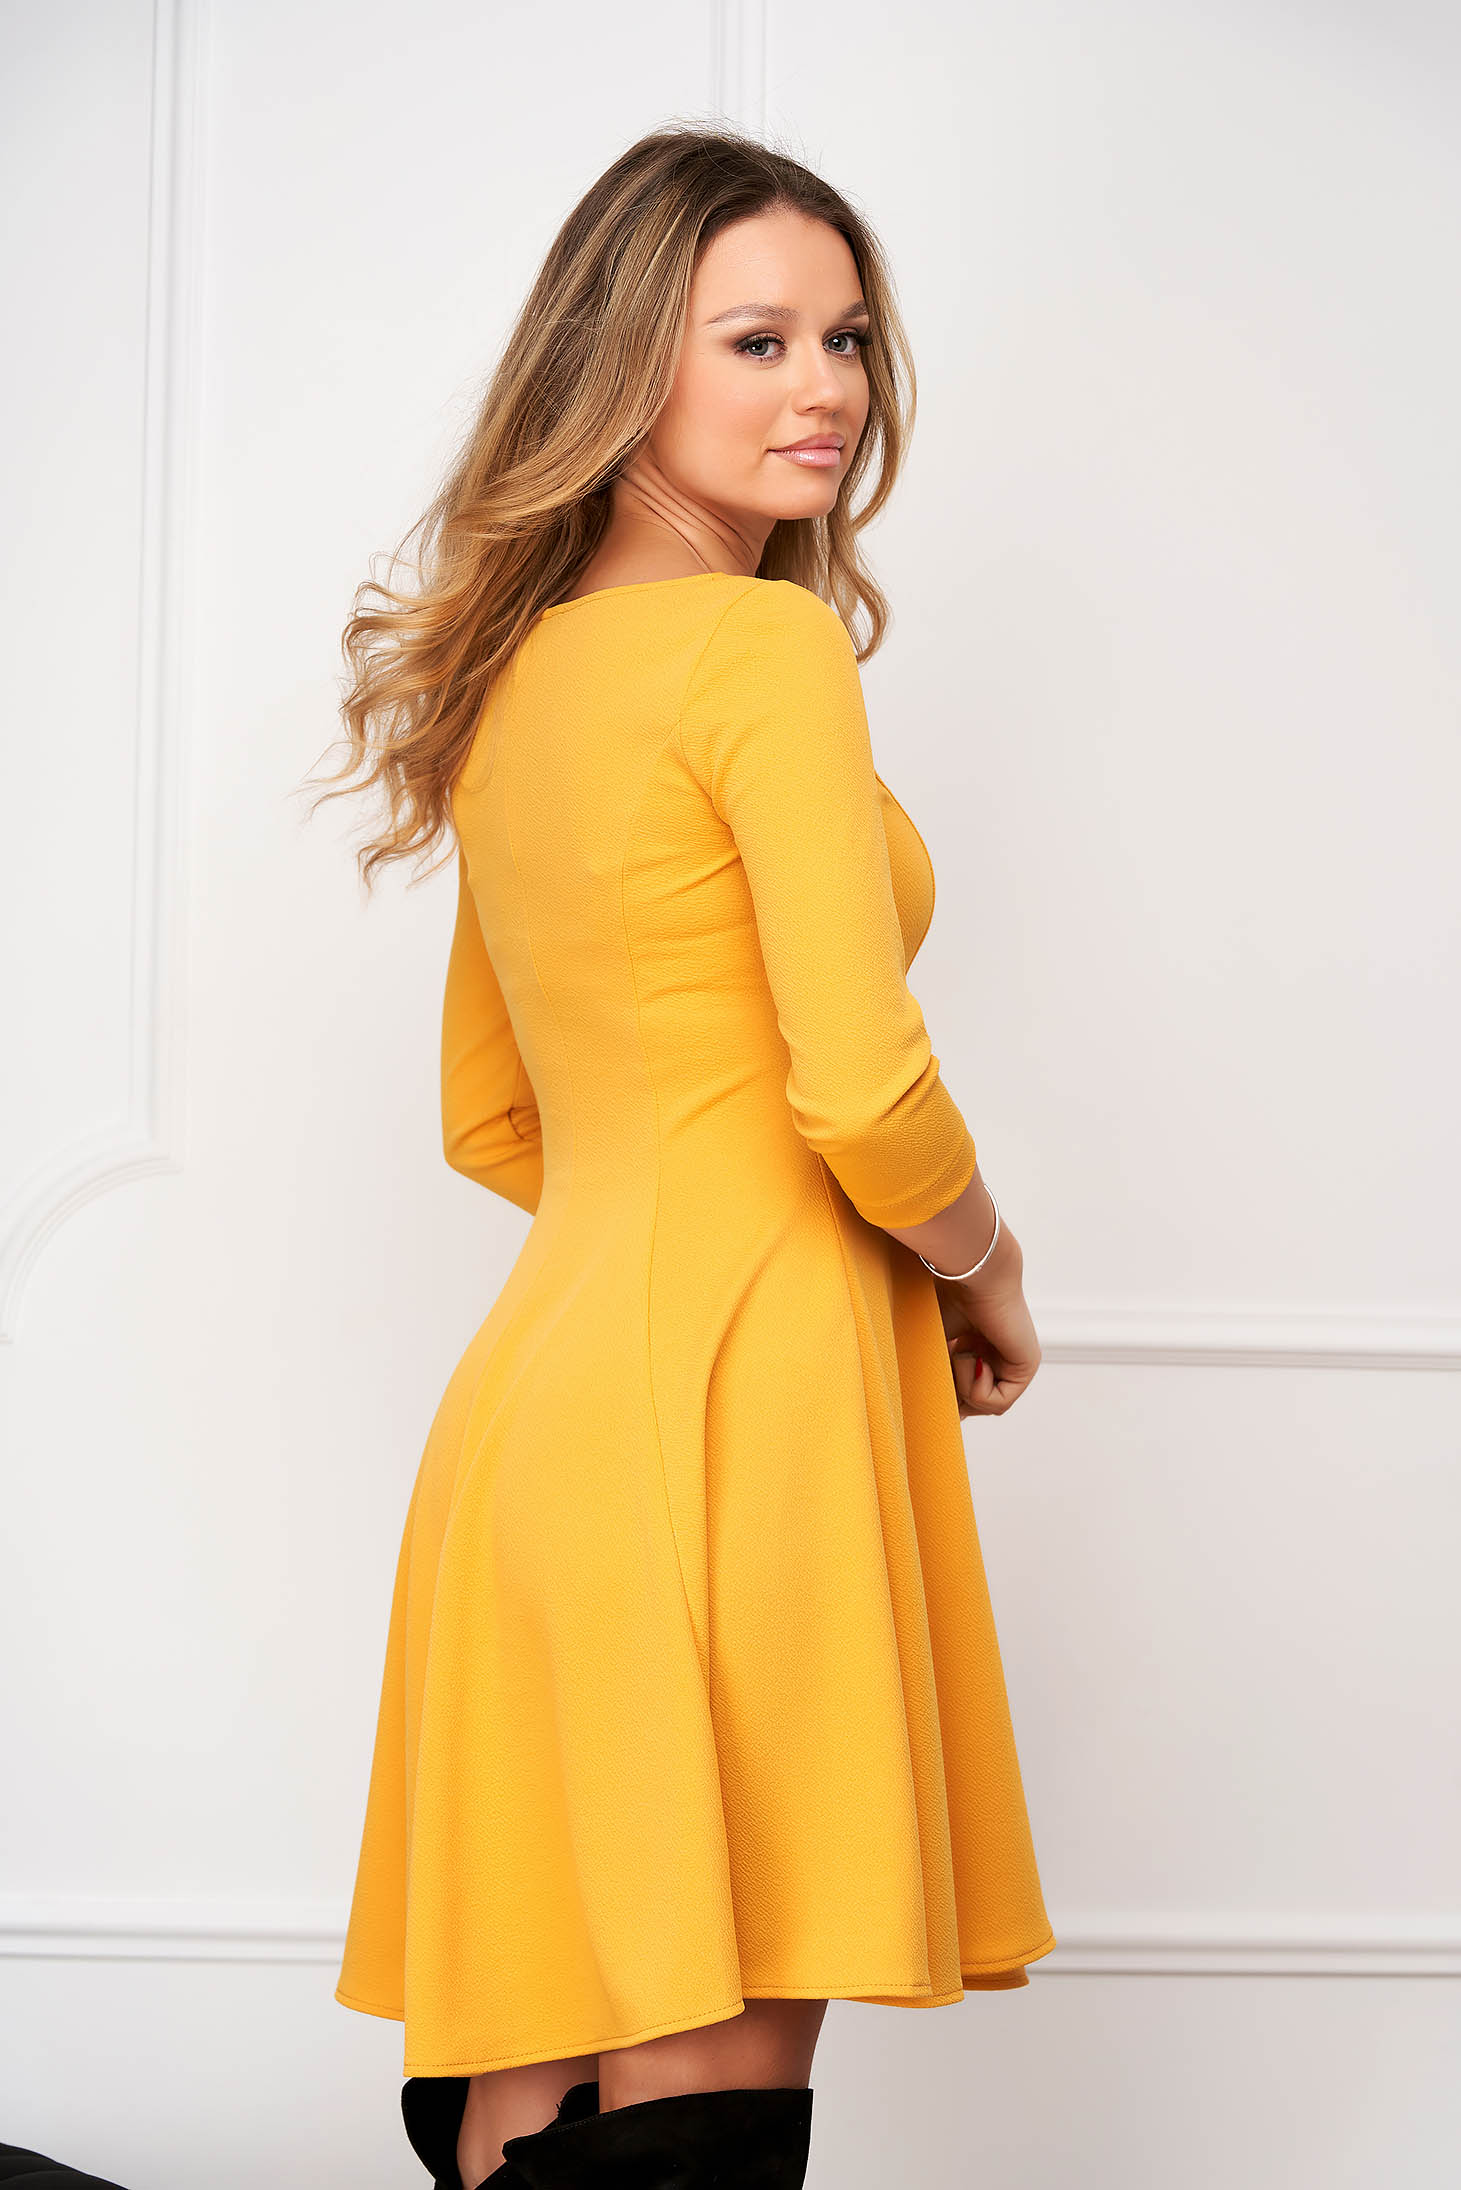 Mustard dress crepe short cut cloche with rounded cleavage - StarShinerS 2 - StarShinerS.com